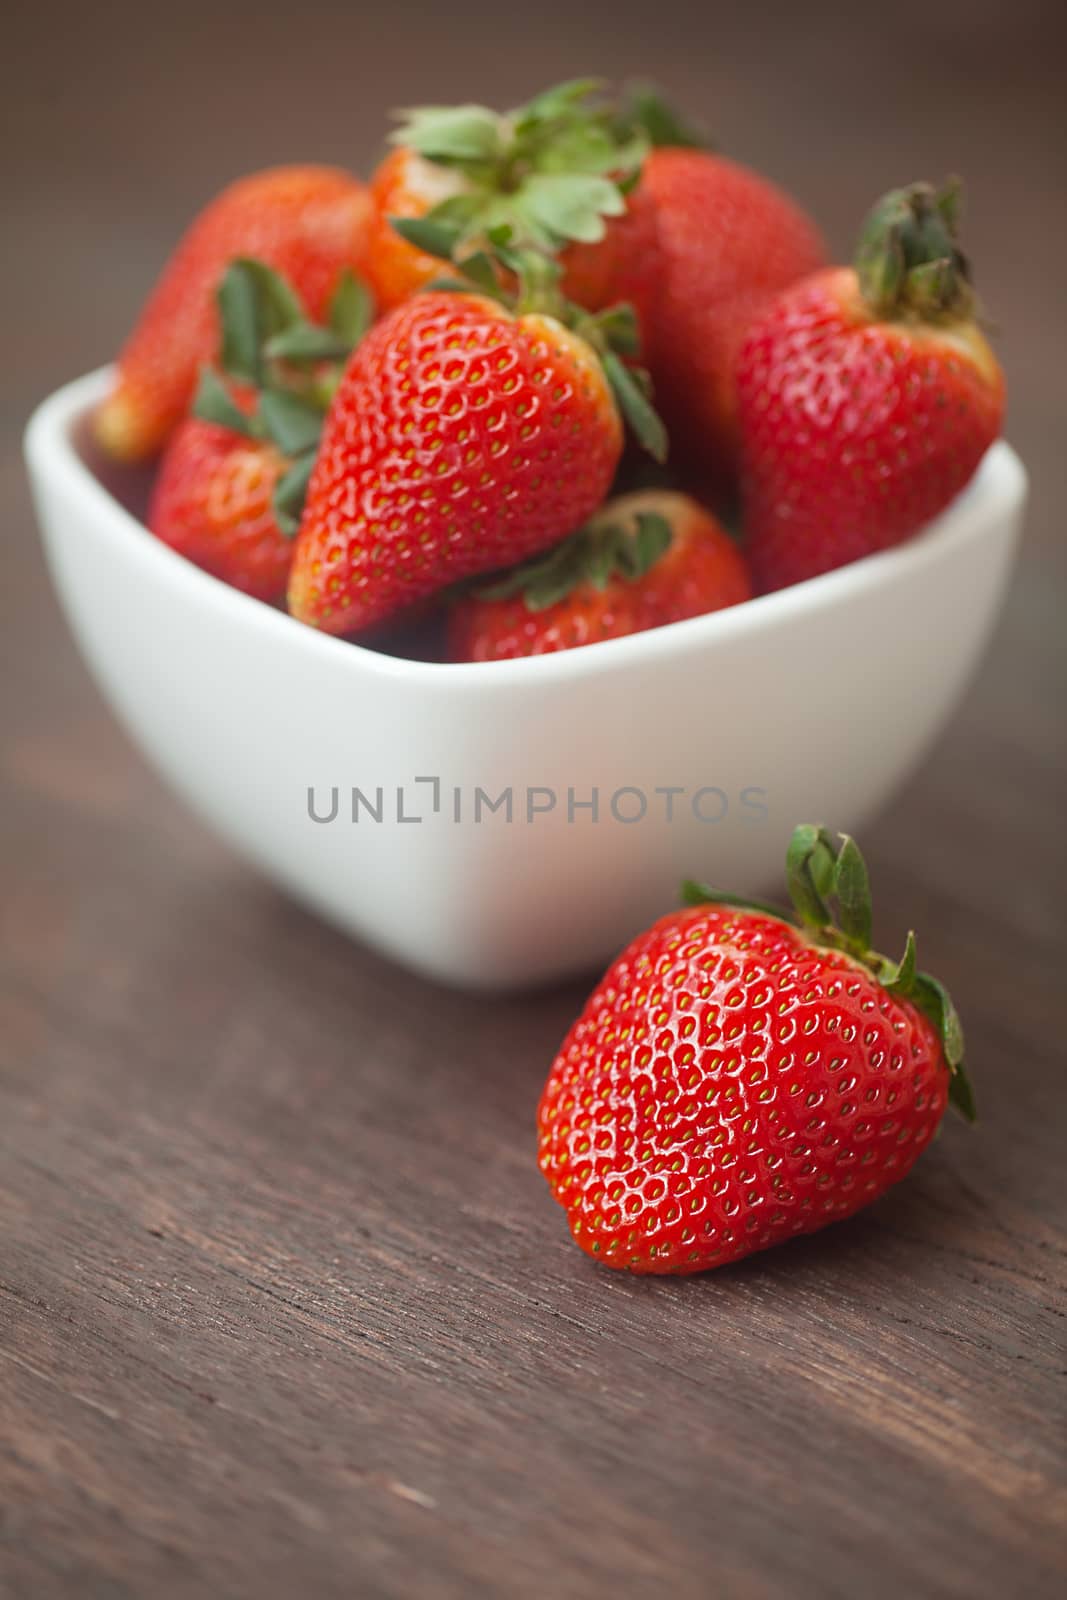 red juicy strawberry in a bowl on a wooden surface by jannyjus